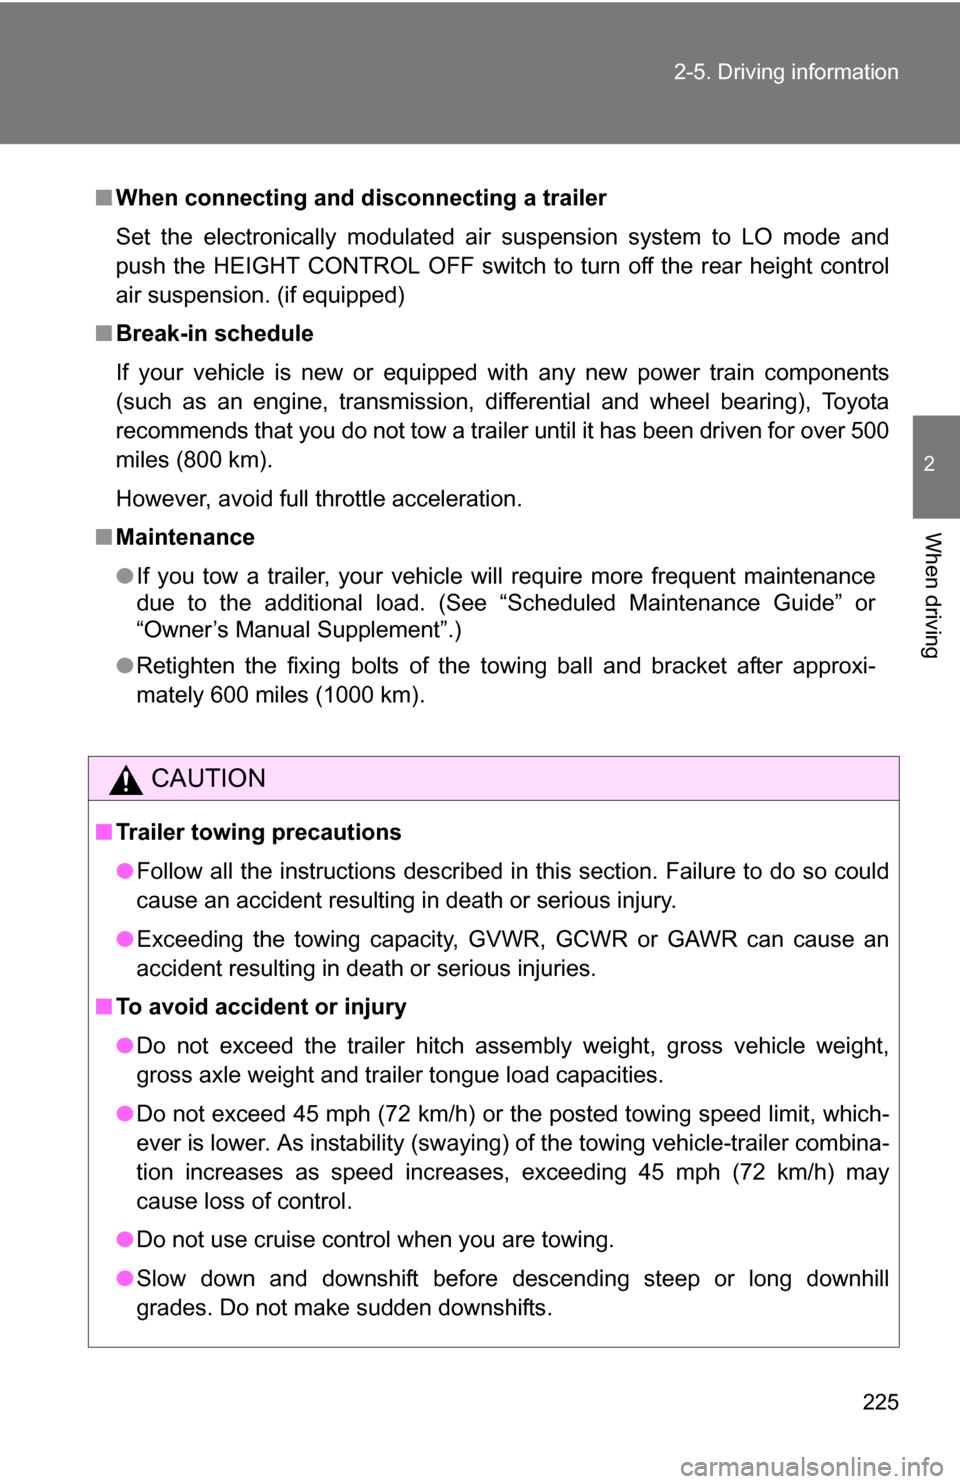 TOYOTA 4RUNNER 2009 N280 / 5.G Owners Manual 225
2-5. Driving information
2
When driving
■
When connecting and disconnecting a trailer
Set the electronically modulated air suspension system to LO mode and
push the HEIGHT CONTROL OFF switch to 